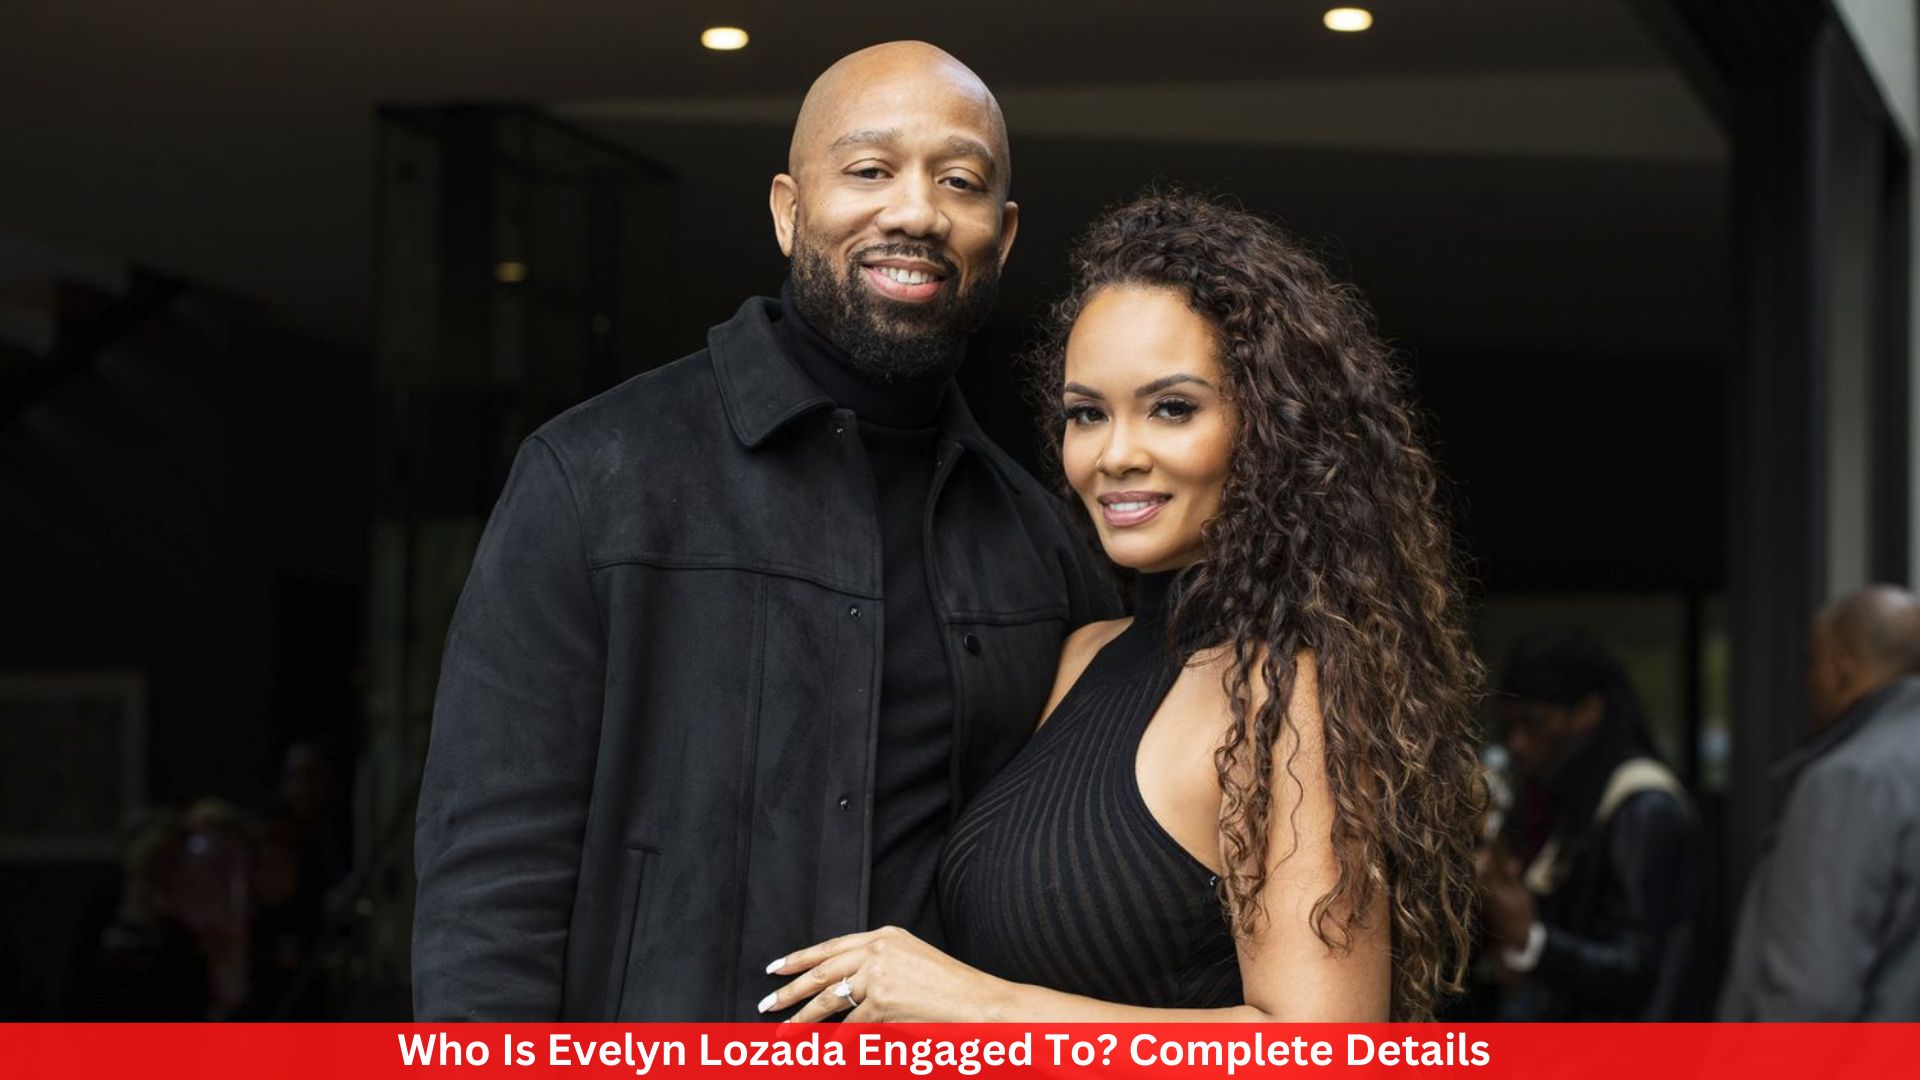 Who Is Evelyn Lozada Engaged To? Complete Details